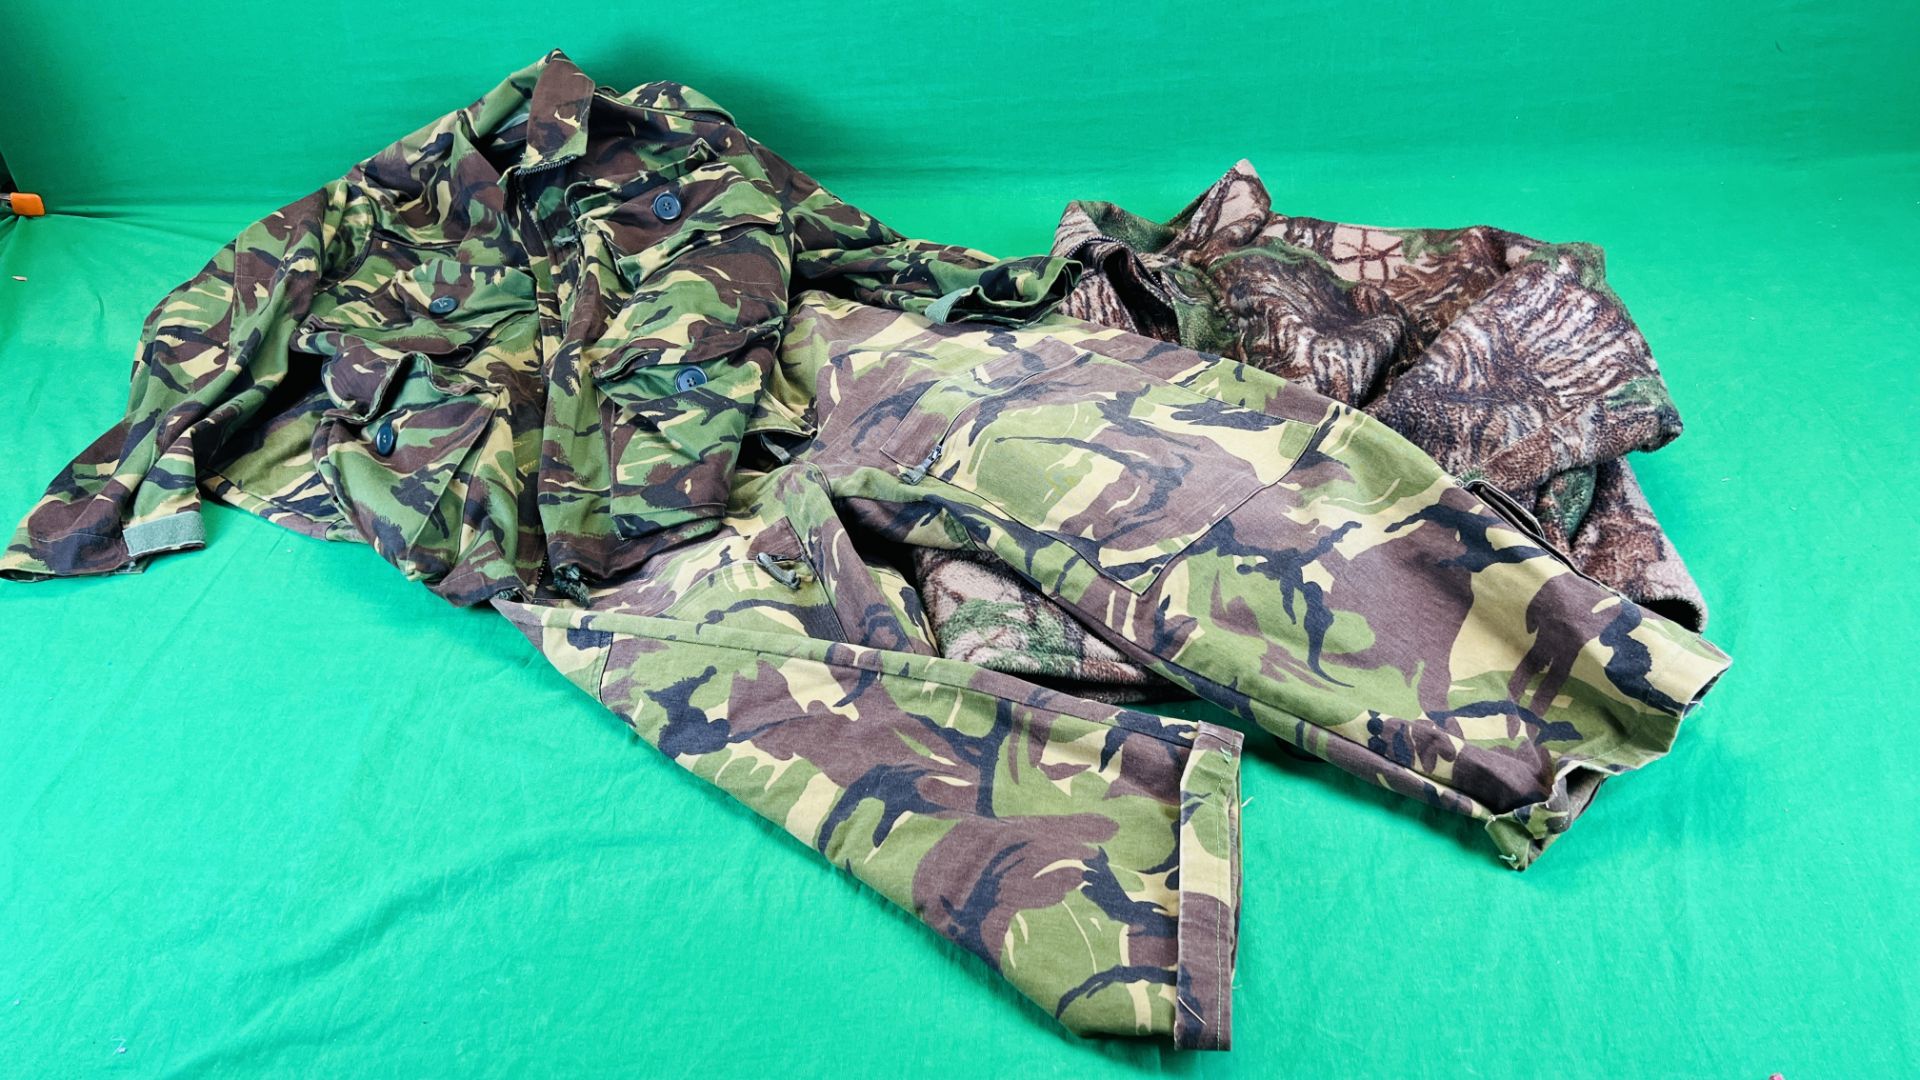 AN AMERICAN WHITETAIL XL CAMO JACKET, KLM CAMO OVERALLS,